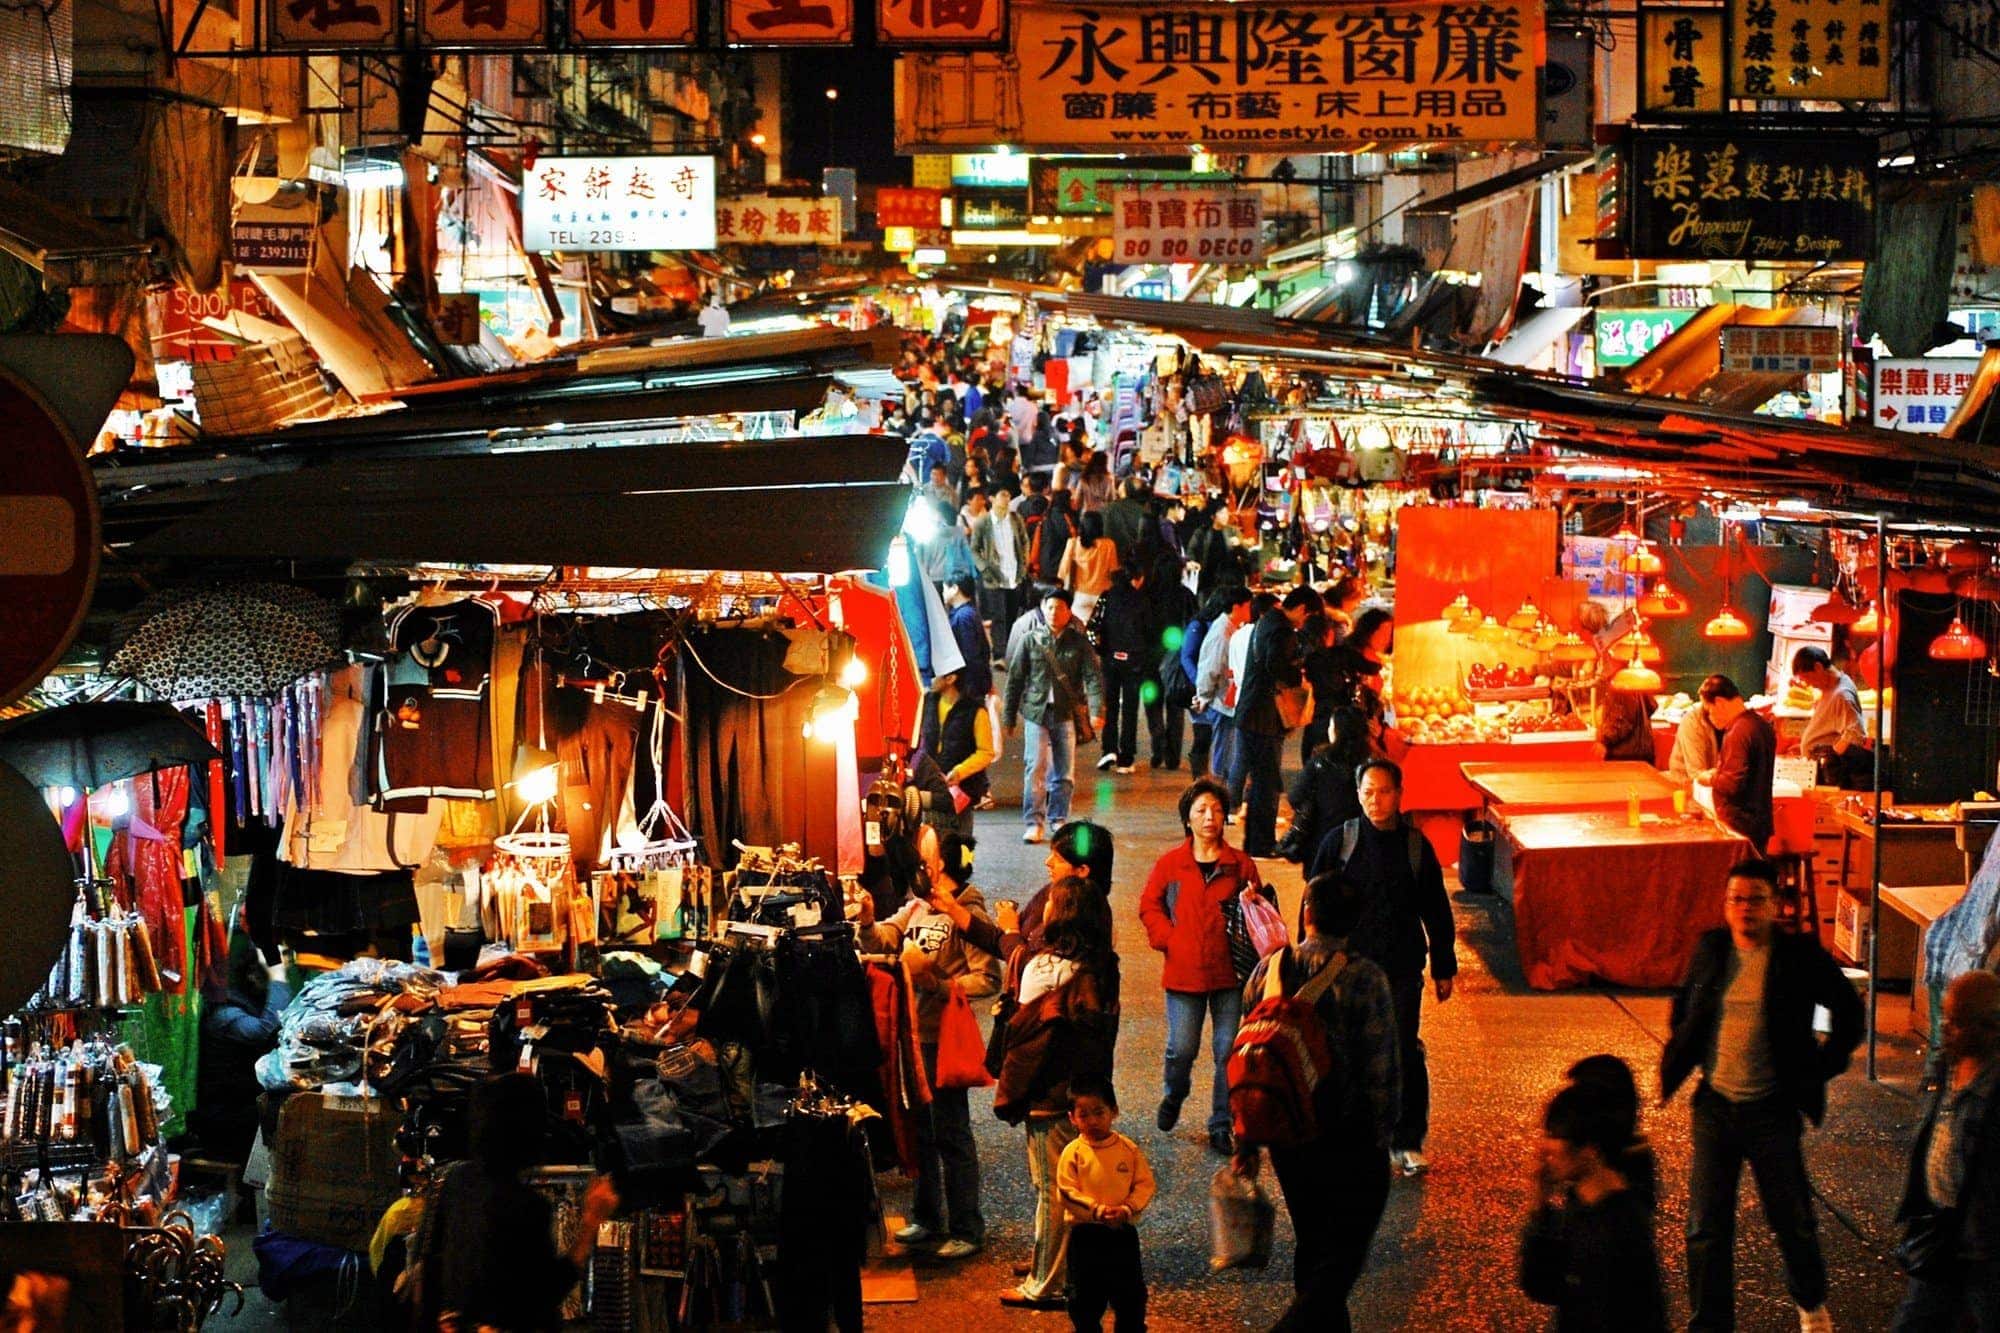 Best place to shopping - Night markets